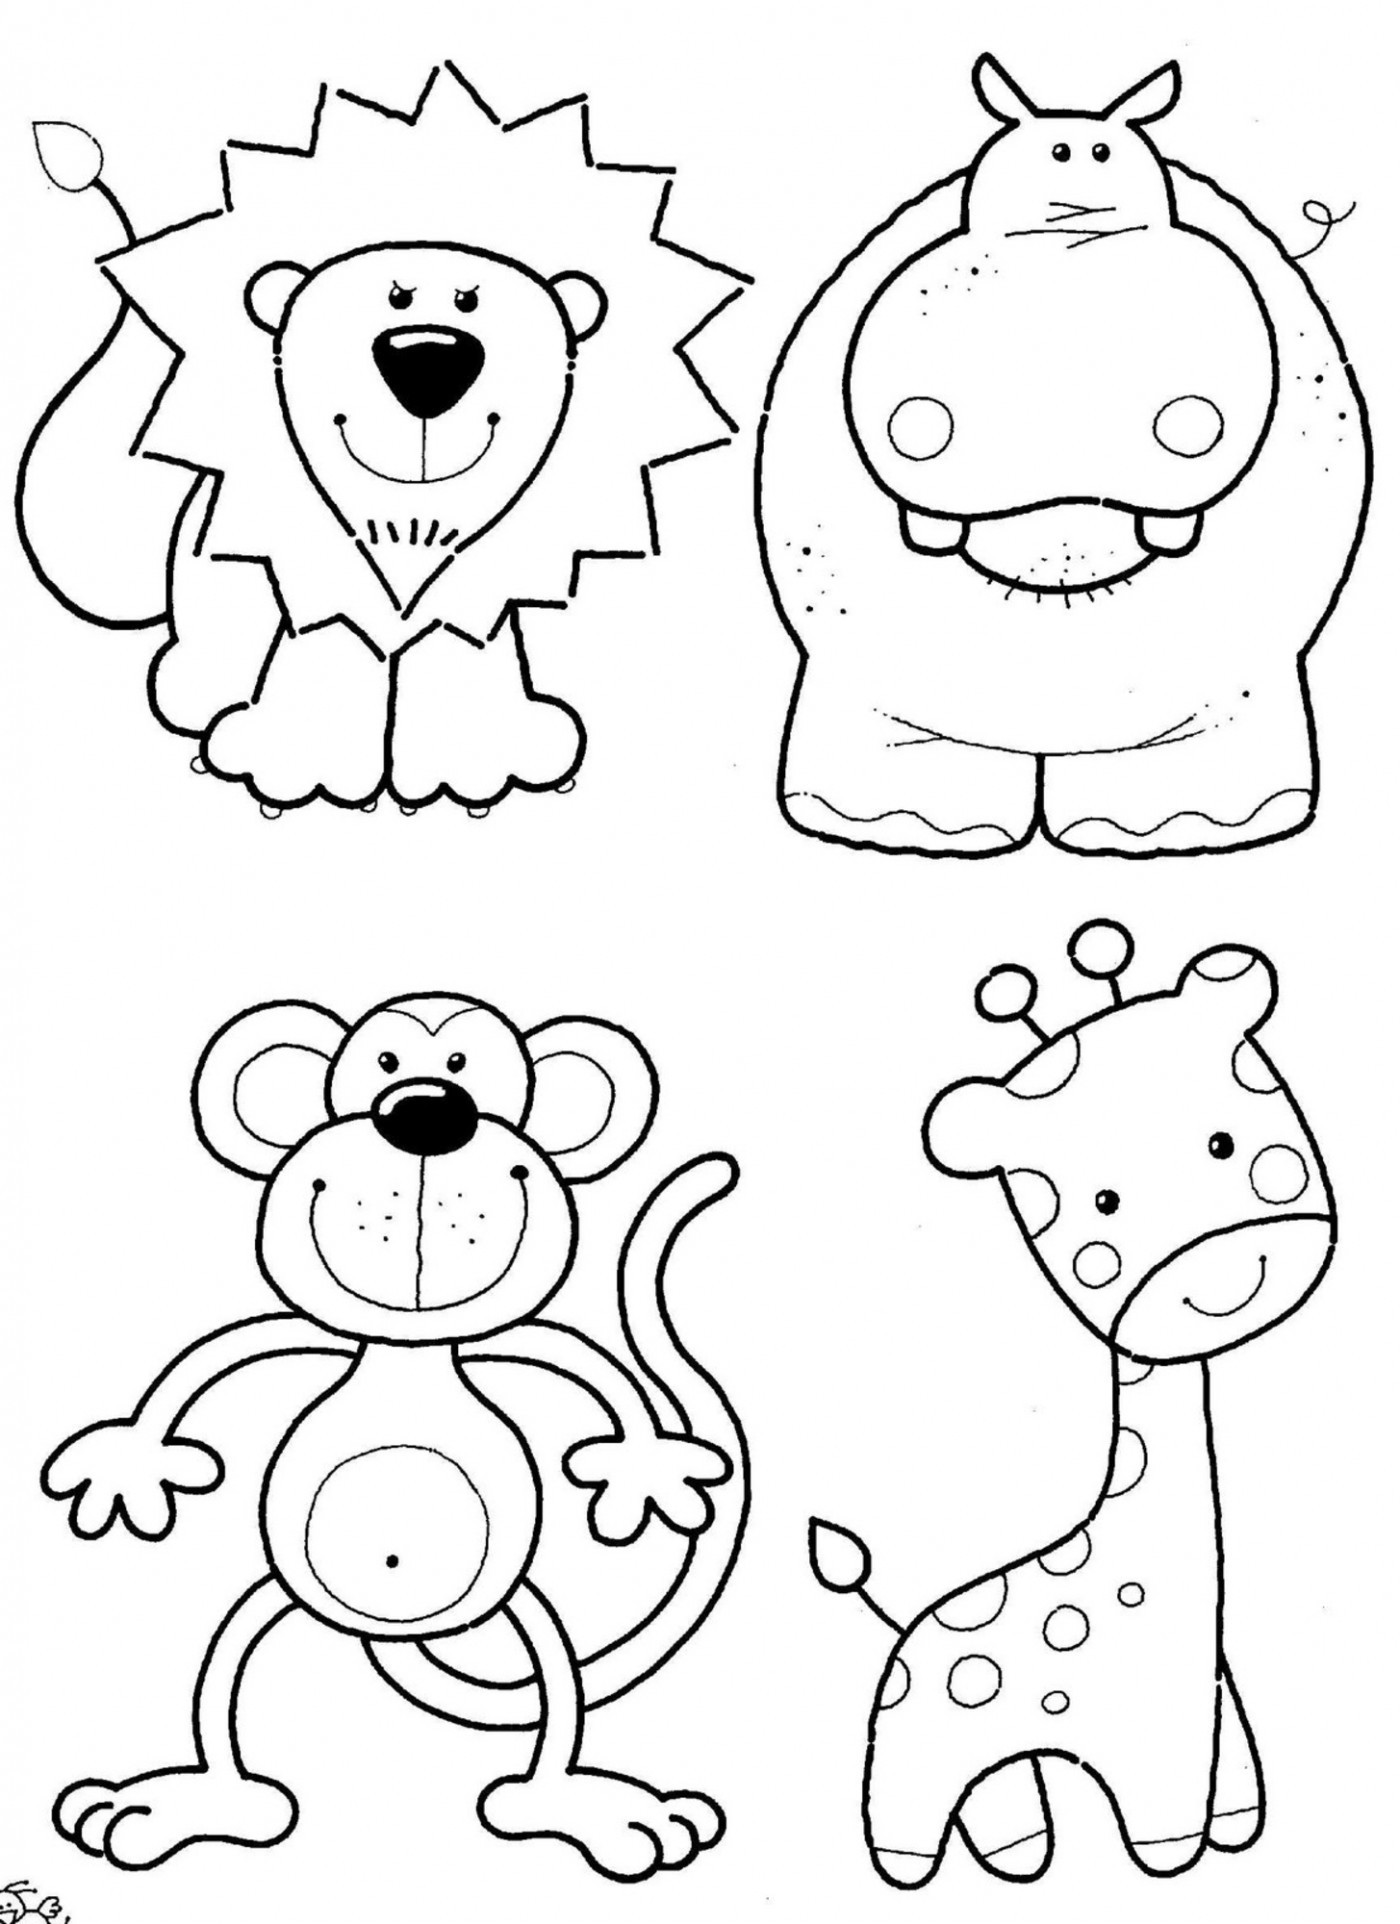 Printable Animal Coloring Pages For Kids
 Animal Coloring Pages 14